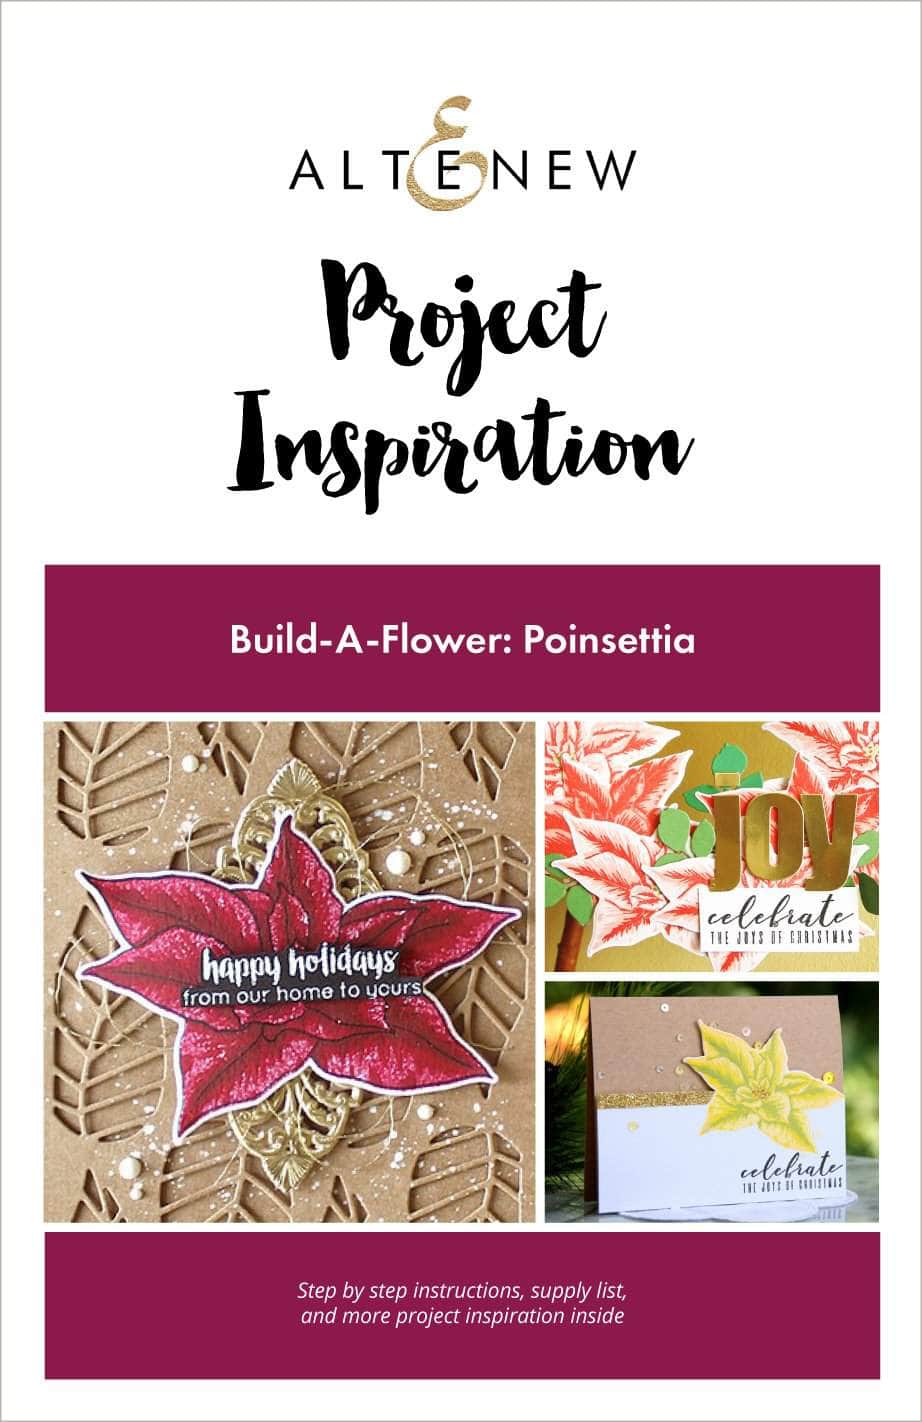 Printed Media Build-A-Flower: Poinsettia Project Inspiration Guide